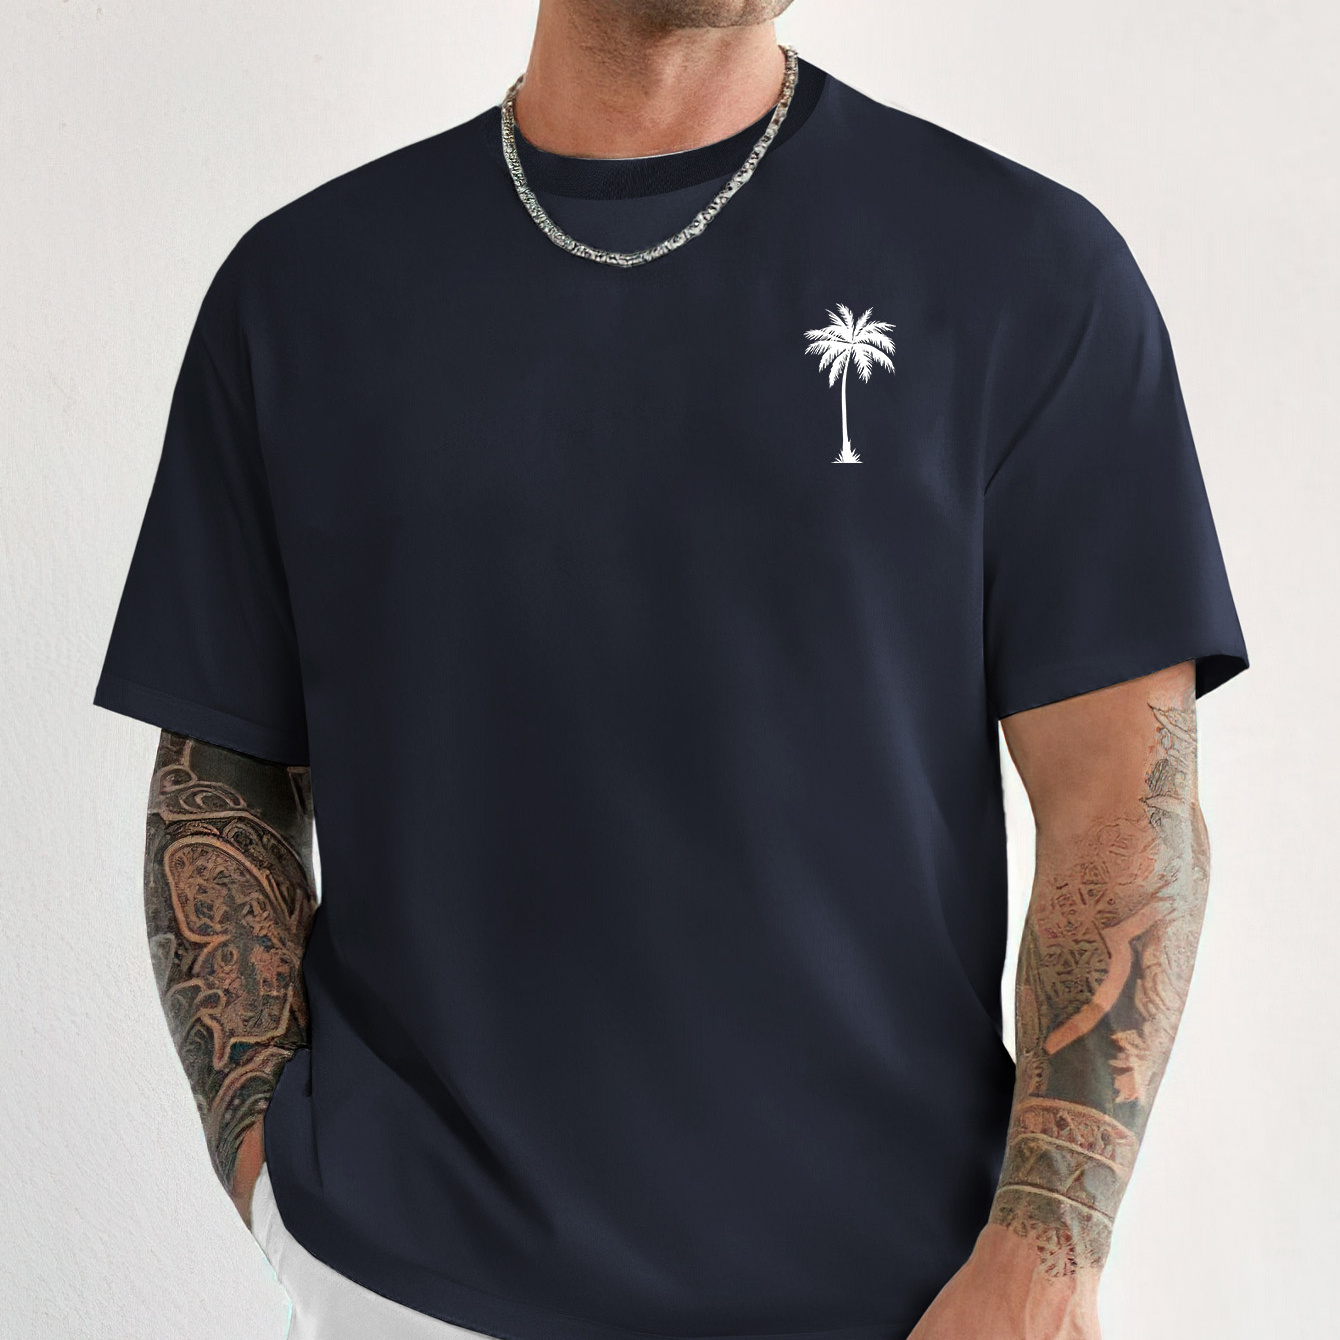 

Coconut Palm Simple Print Tee Shirt, Tees For Men, Casual Short Sleeve T-shirt For Summer